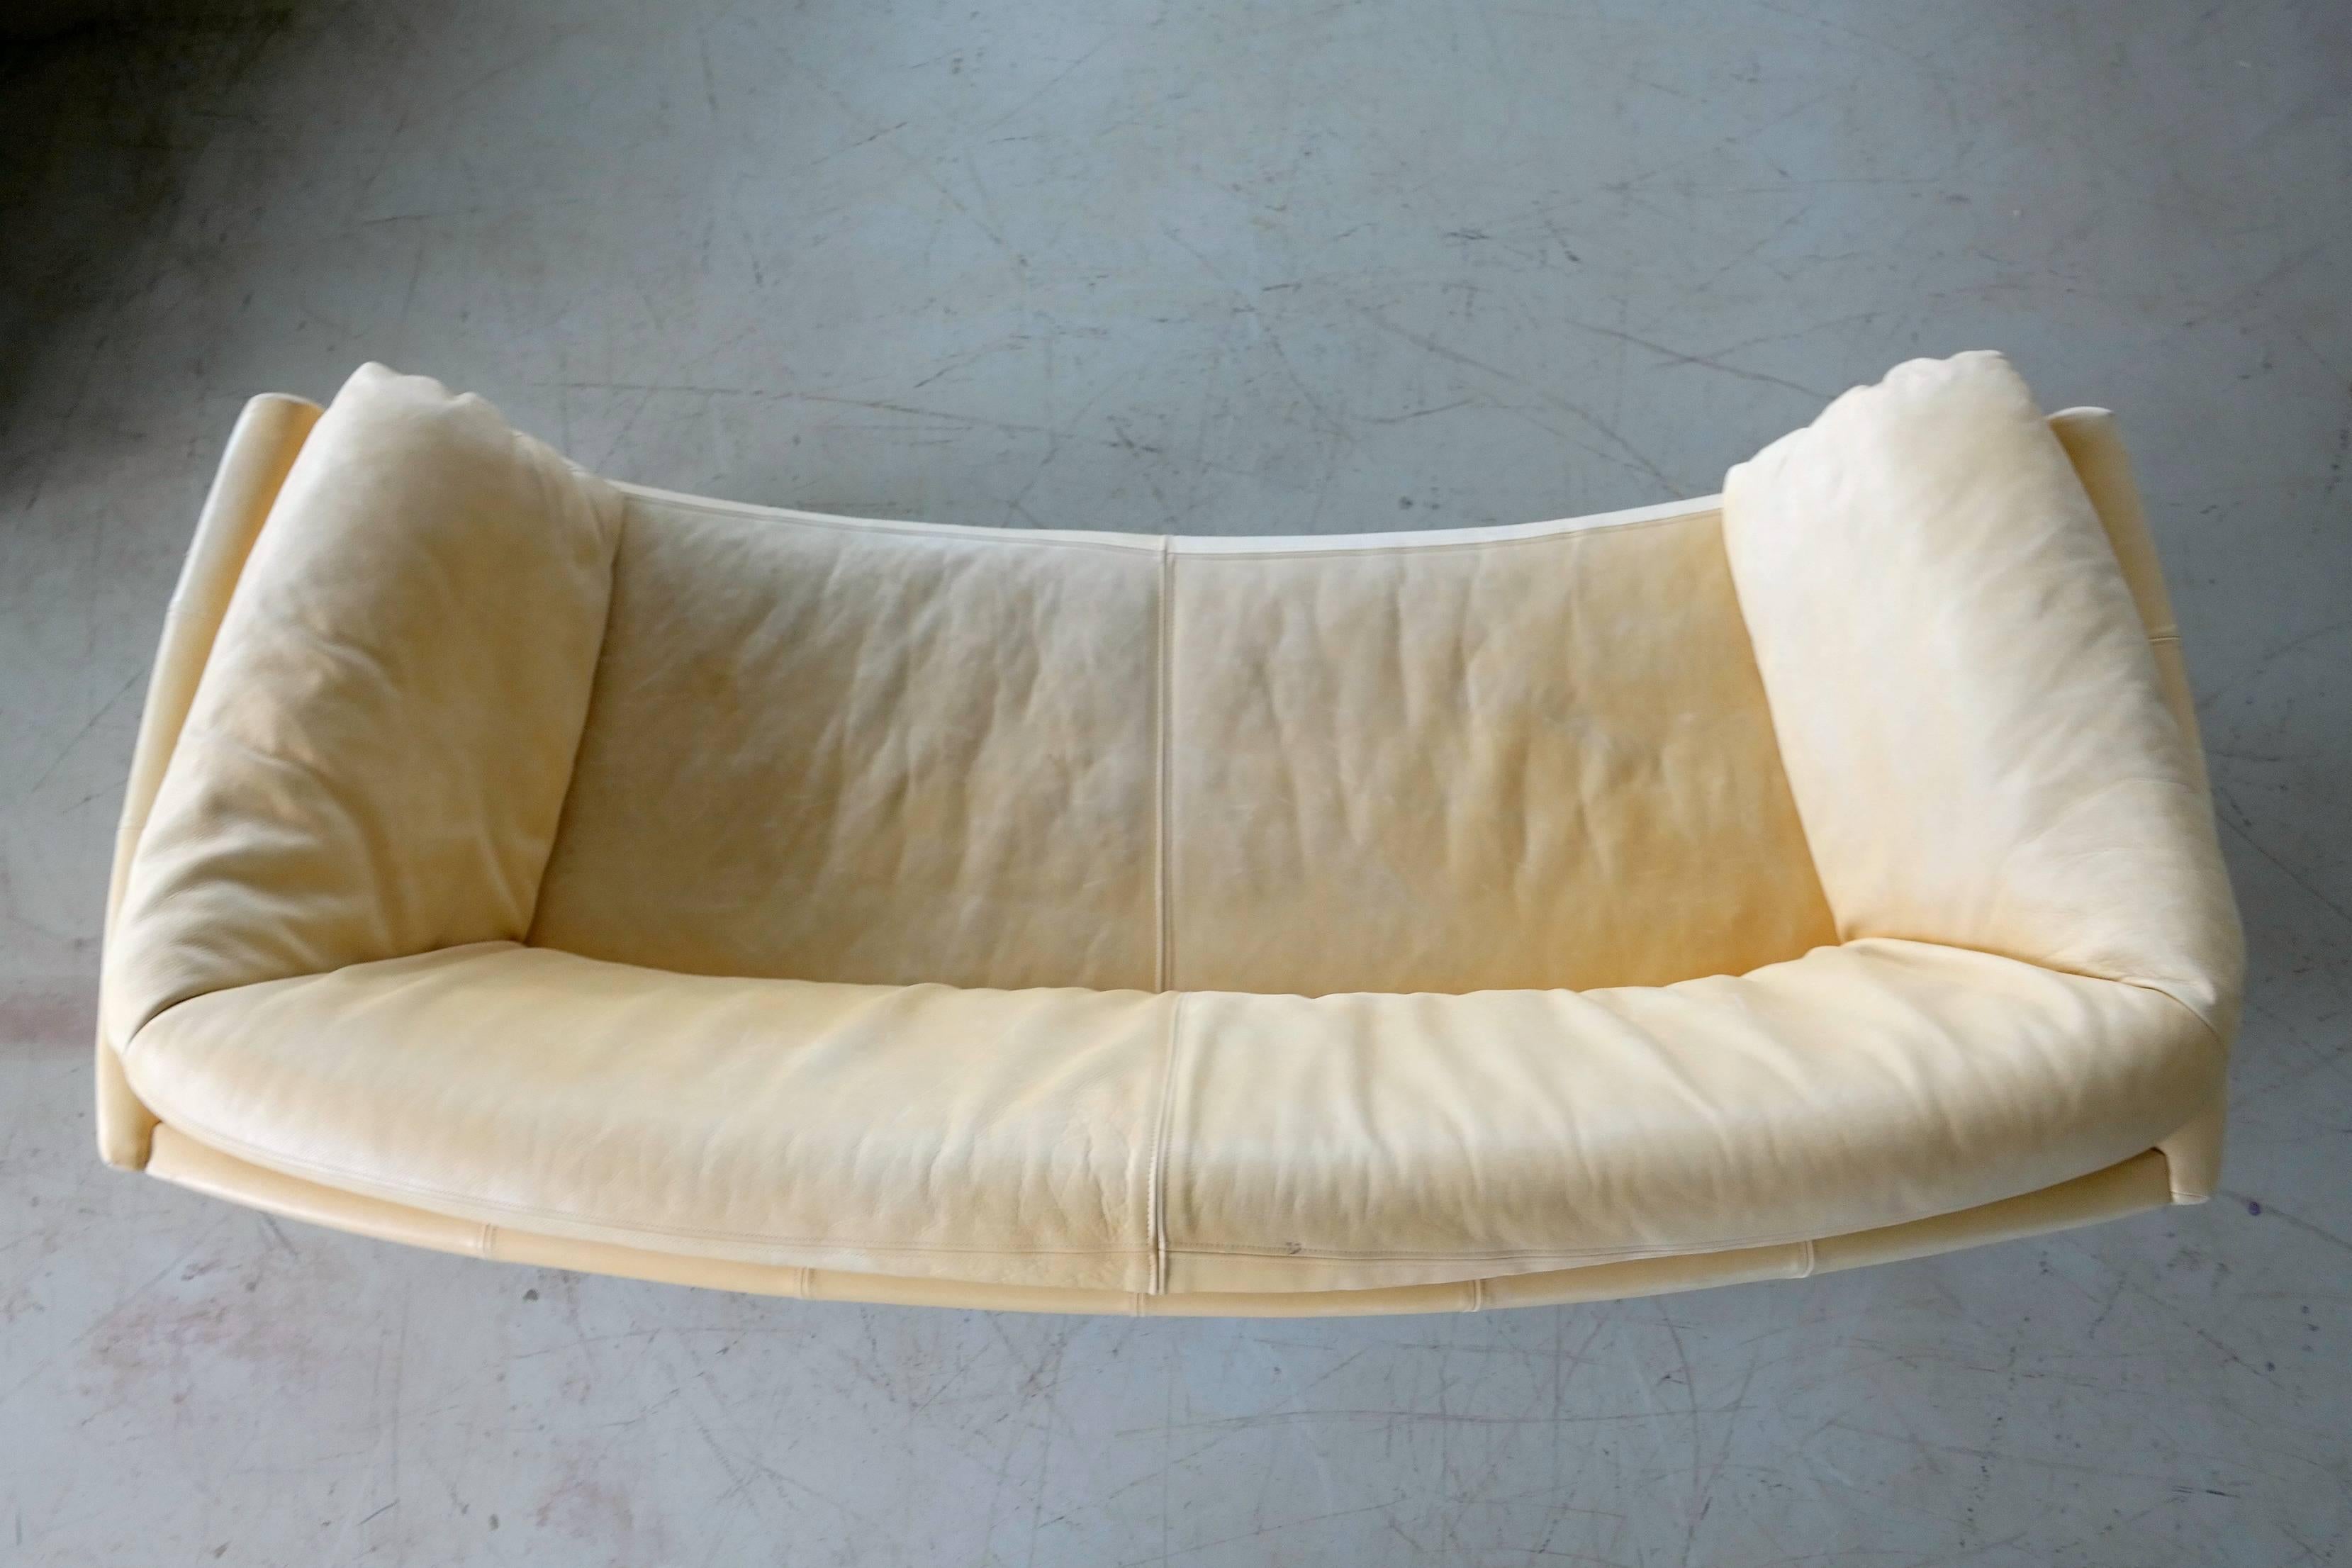 Mid-20th Century Danish Curved Sofa in Pale Yellow Leather Model MH535 by Mogens Hansen